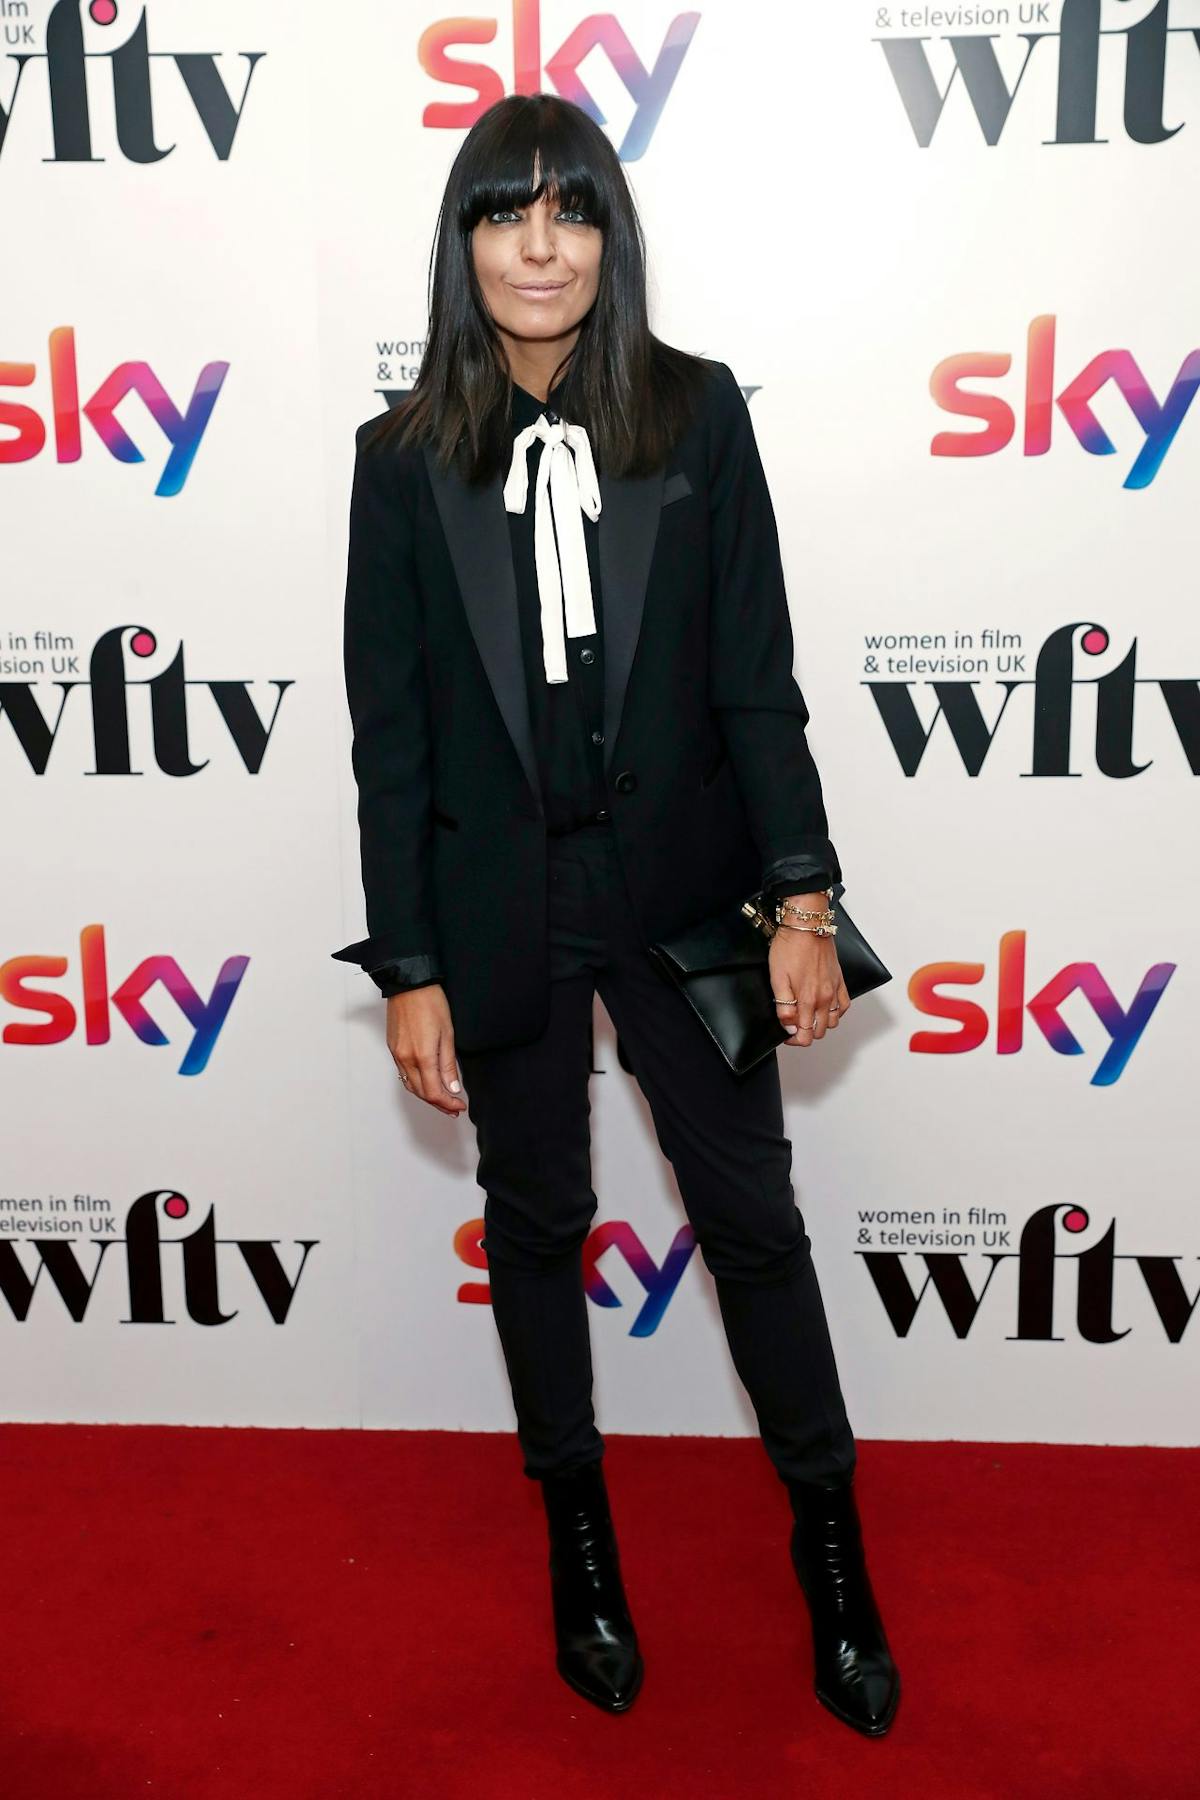 Claudia Winkleman pays tribute to nurses who supported her